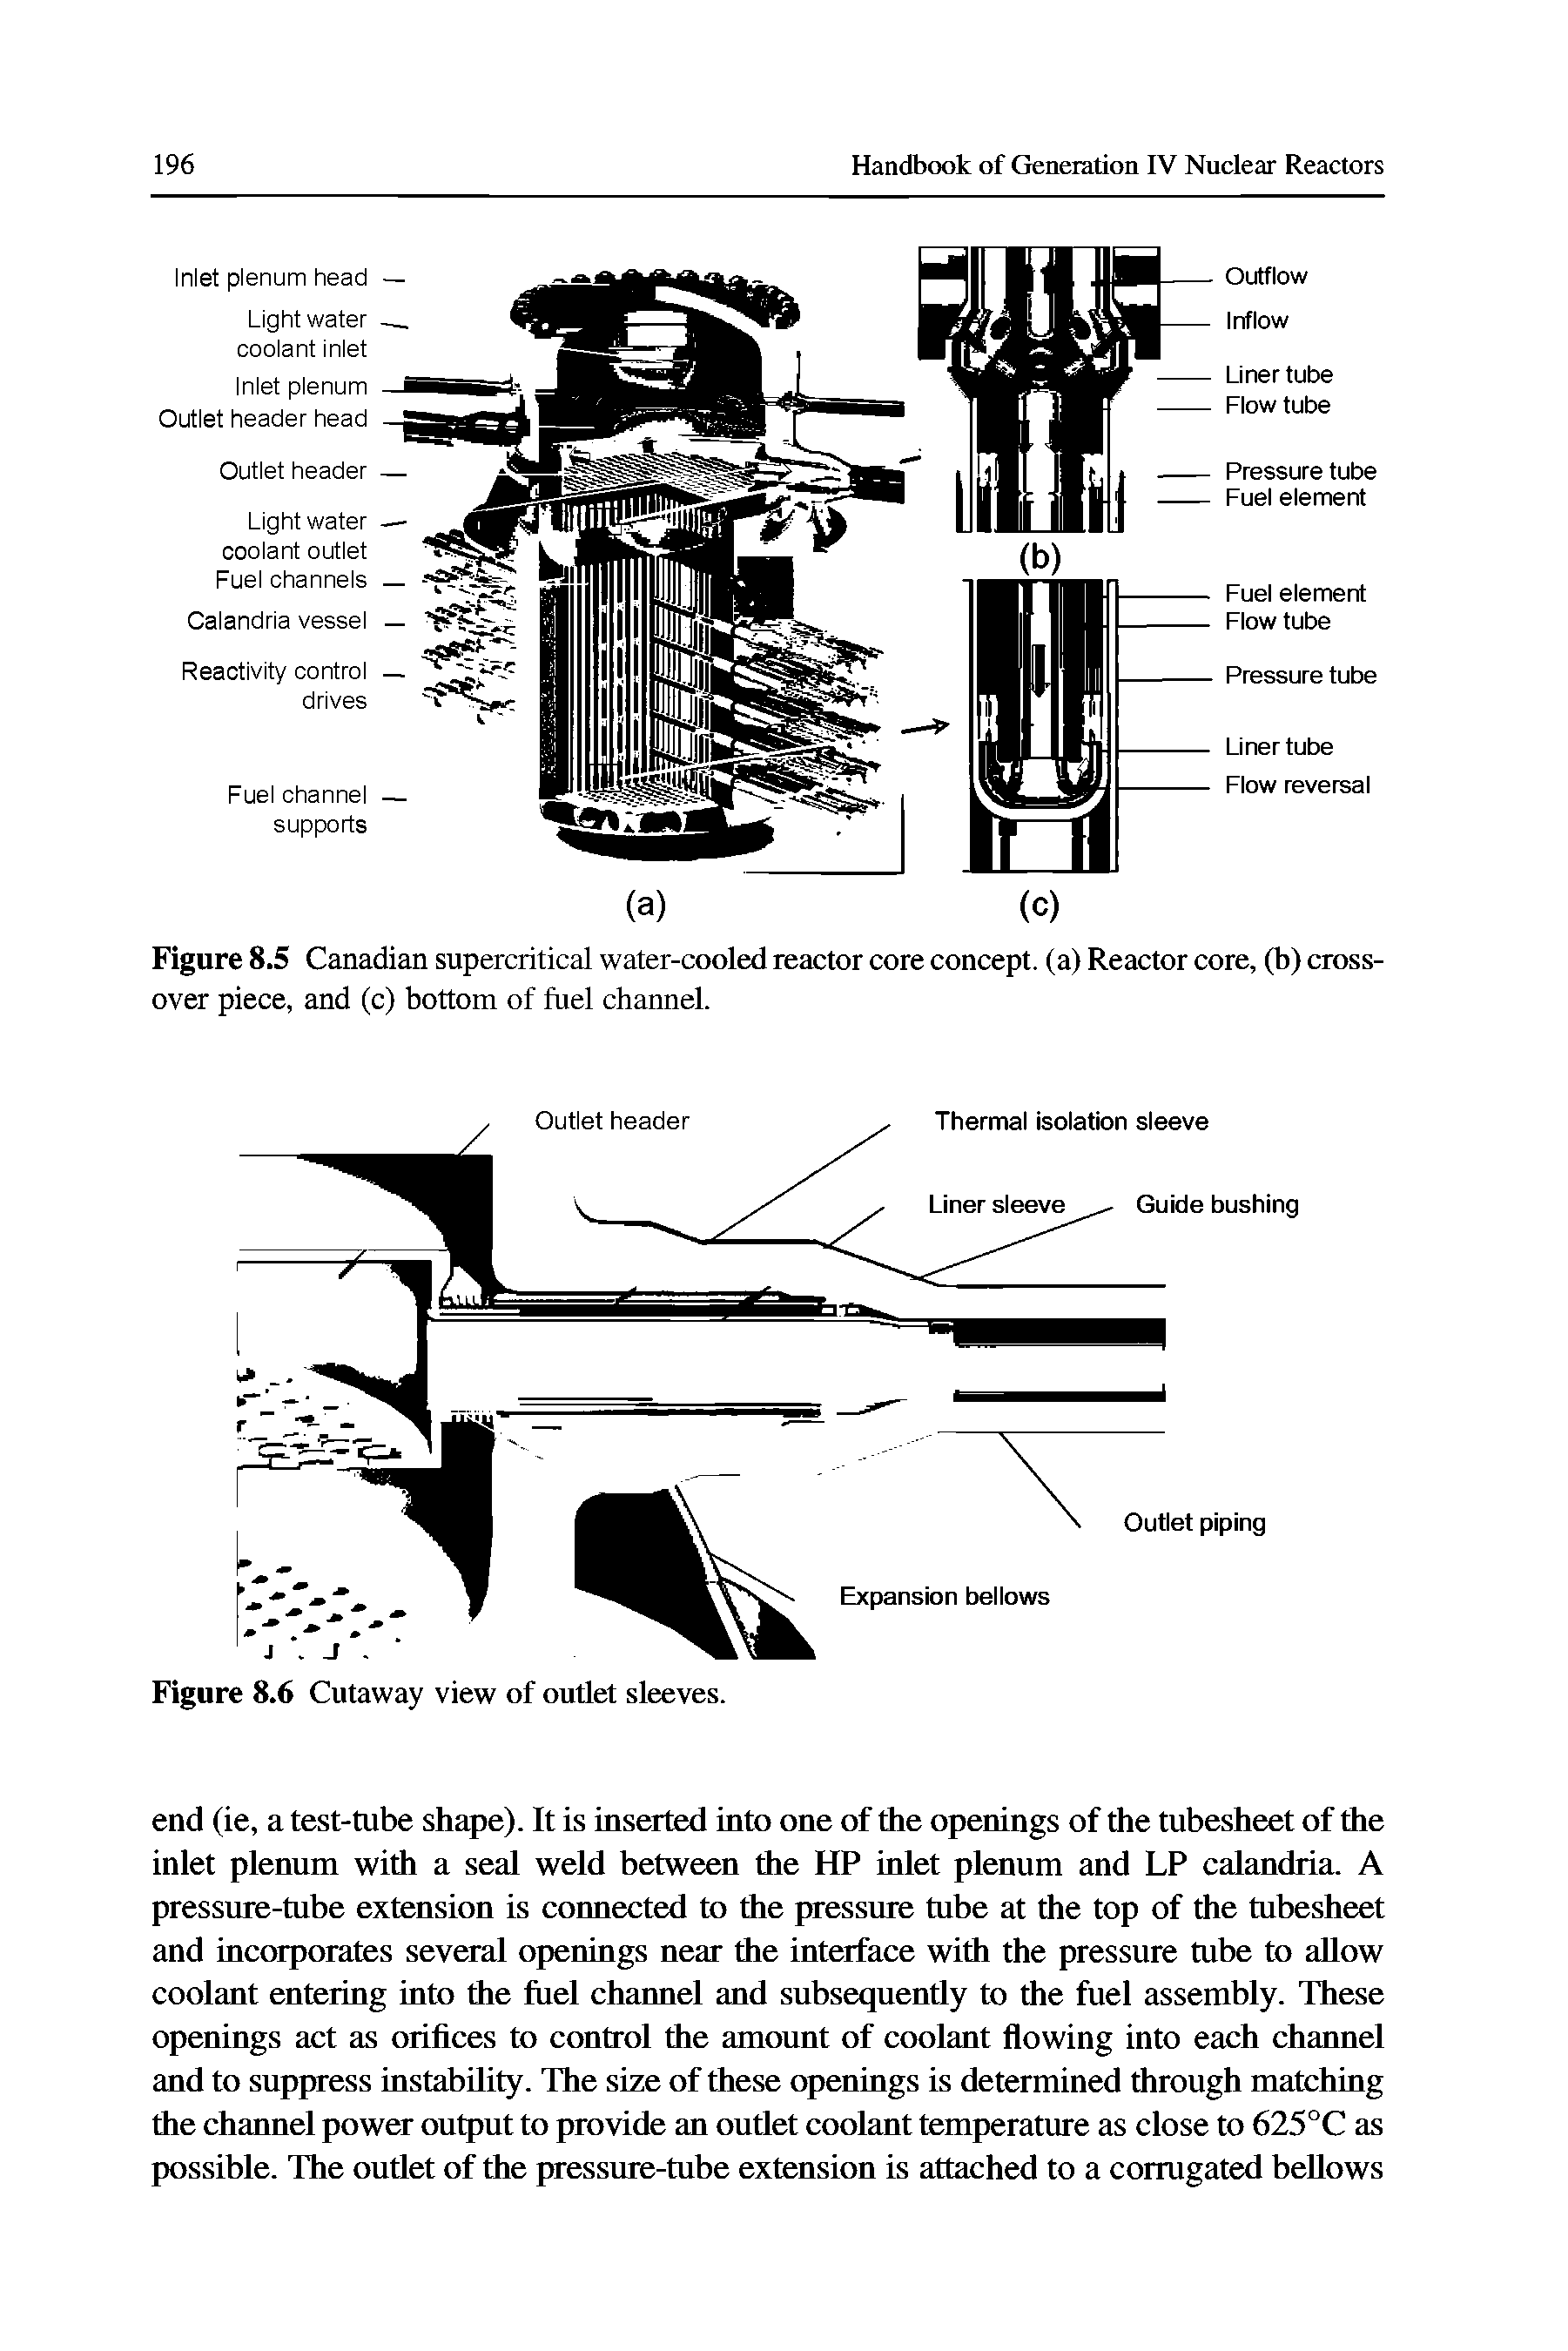 Figure 8.5 Canadian supercritical water-cooled reactor core concept, (a) Reactor core, (b) crossover piece, and (c) bottom of fuel channel.